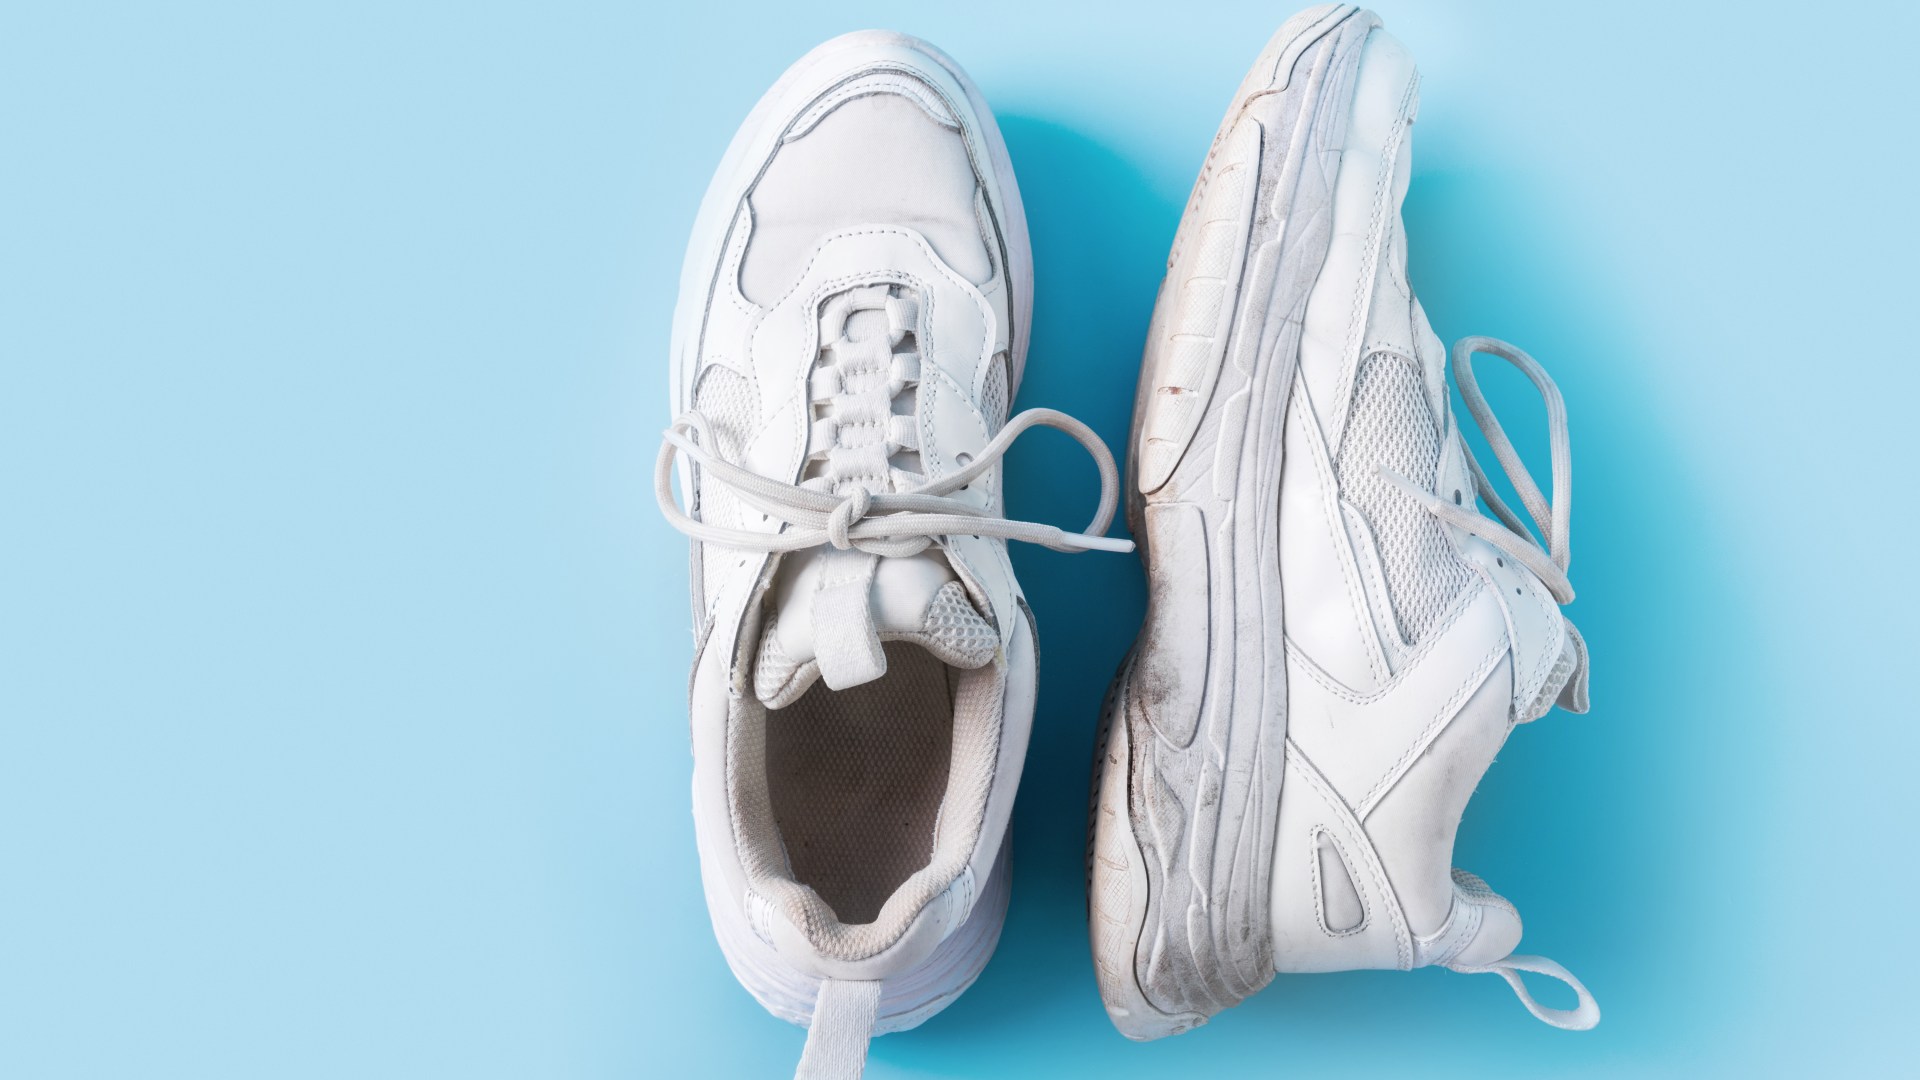 Im a cleaning whizz - my easy toothbrush hack will get your filthy white trainers looking brand new again for summer [Video]